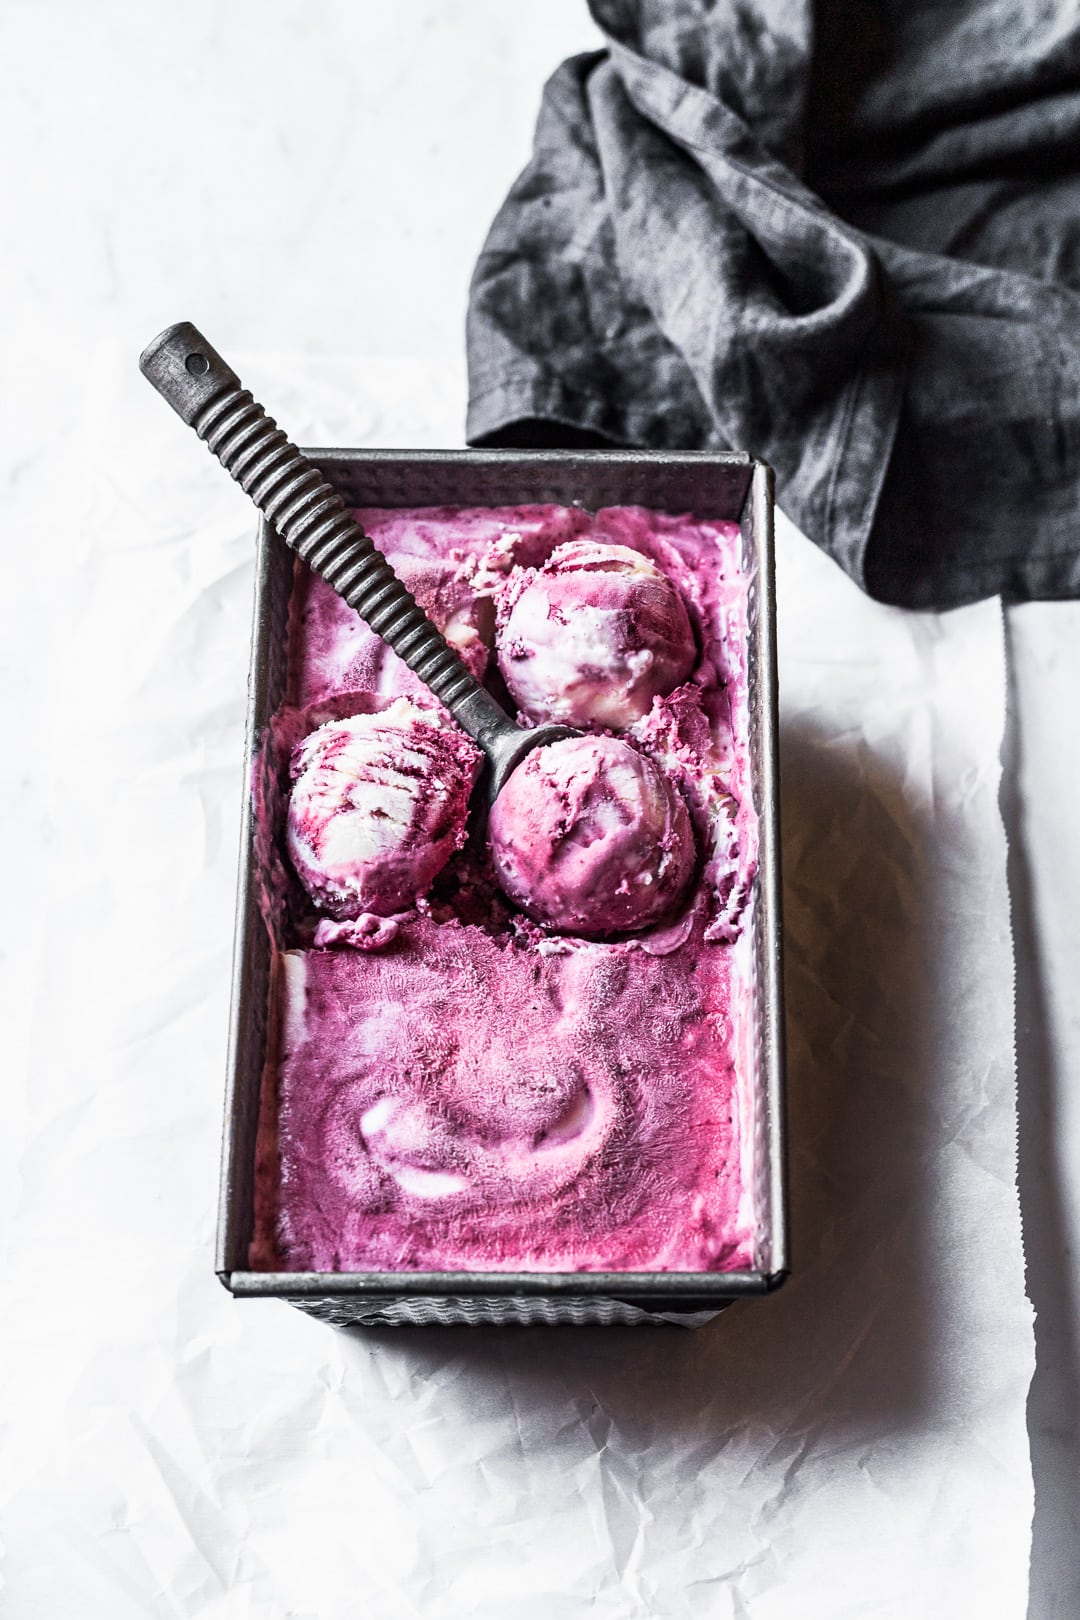 Angled view of purple and white swirled ice cream with three scoops shaped and ice cream scoop resting on container